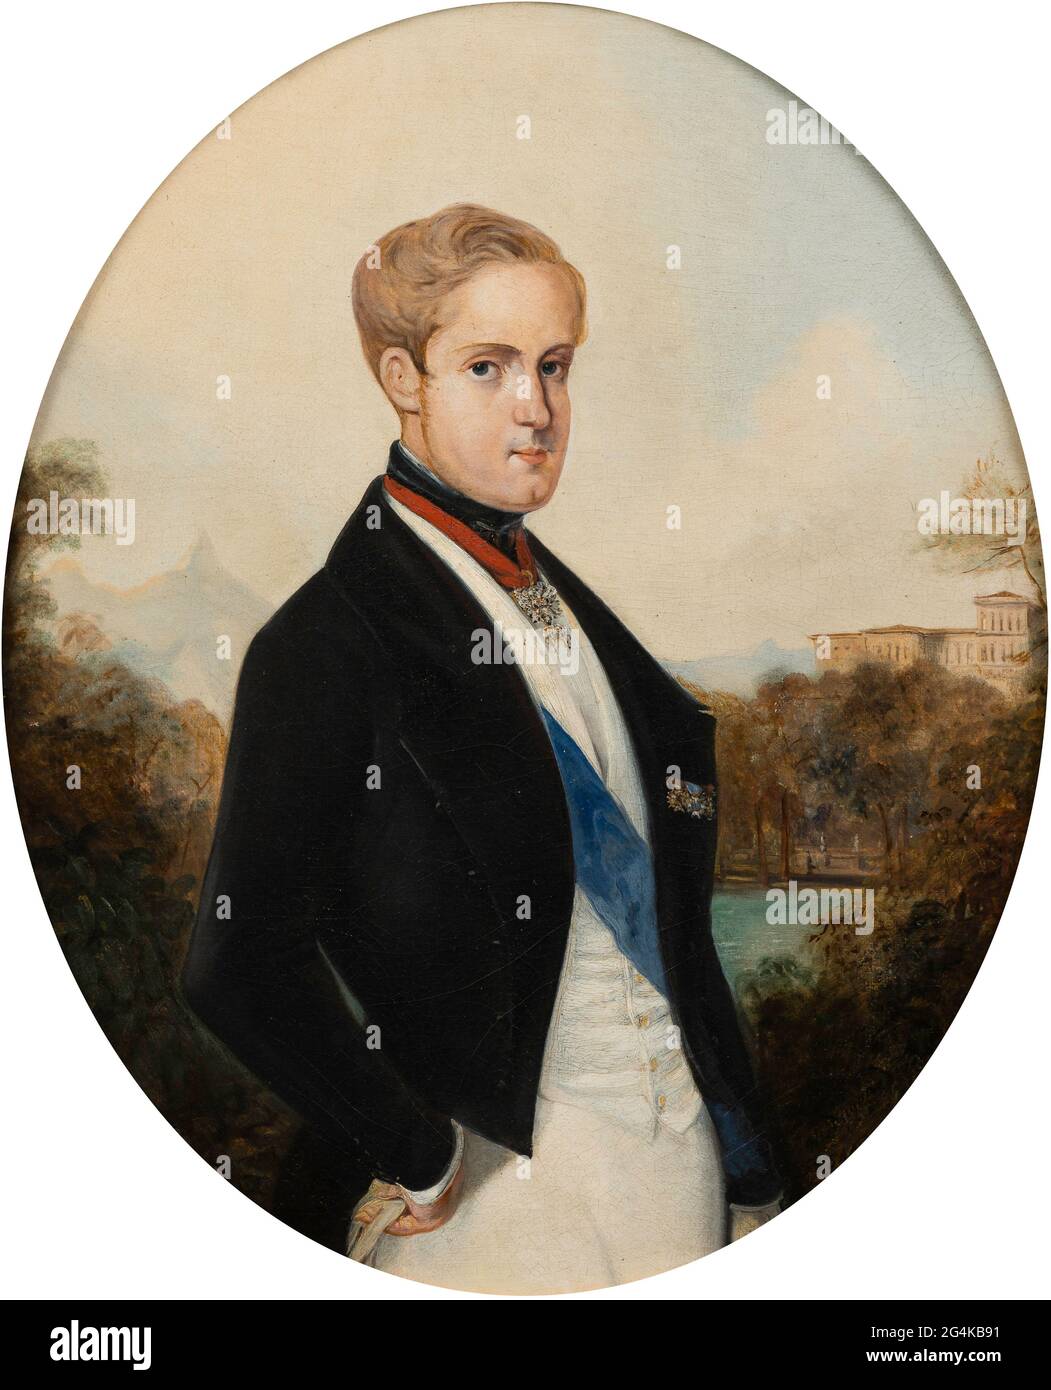 Portrait of Emperor Peter II of Brazil (1825-1891), 1846. Found in the collection of Instituto Cultural Ita&#xfa;. Stock Photo